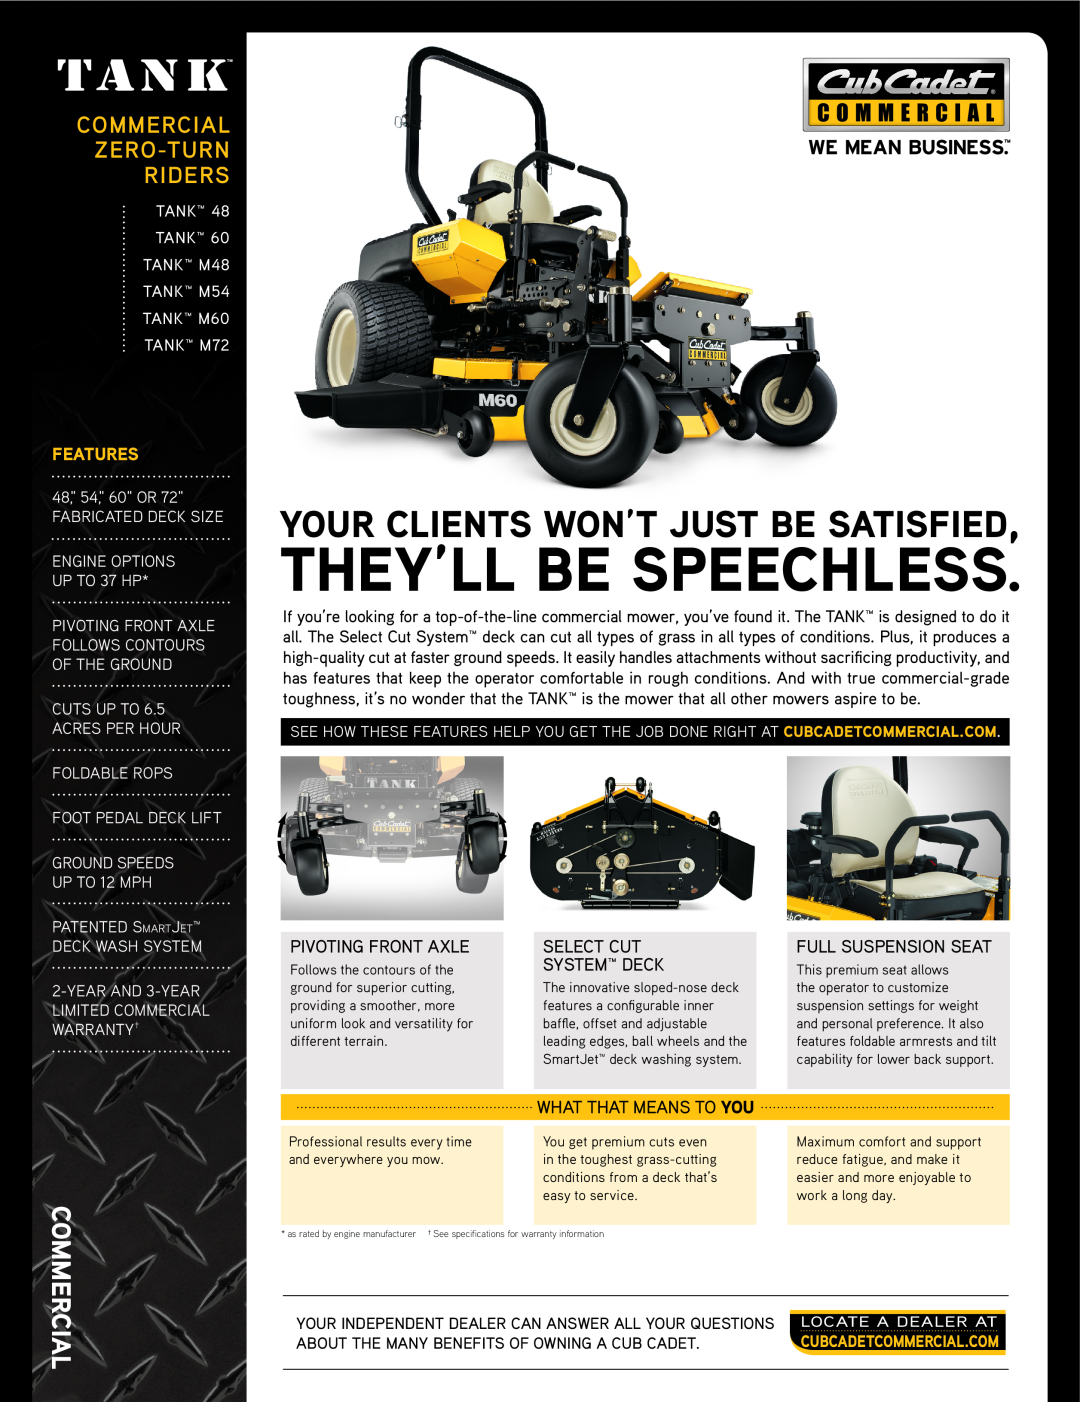 Cub Cadet M72, M48, M60 warranty Full Suspension Seat, about the many benefits of owning a Cub Cadet, they’ll be speechless 